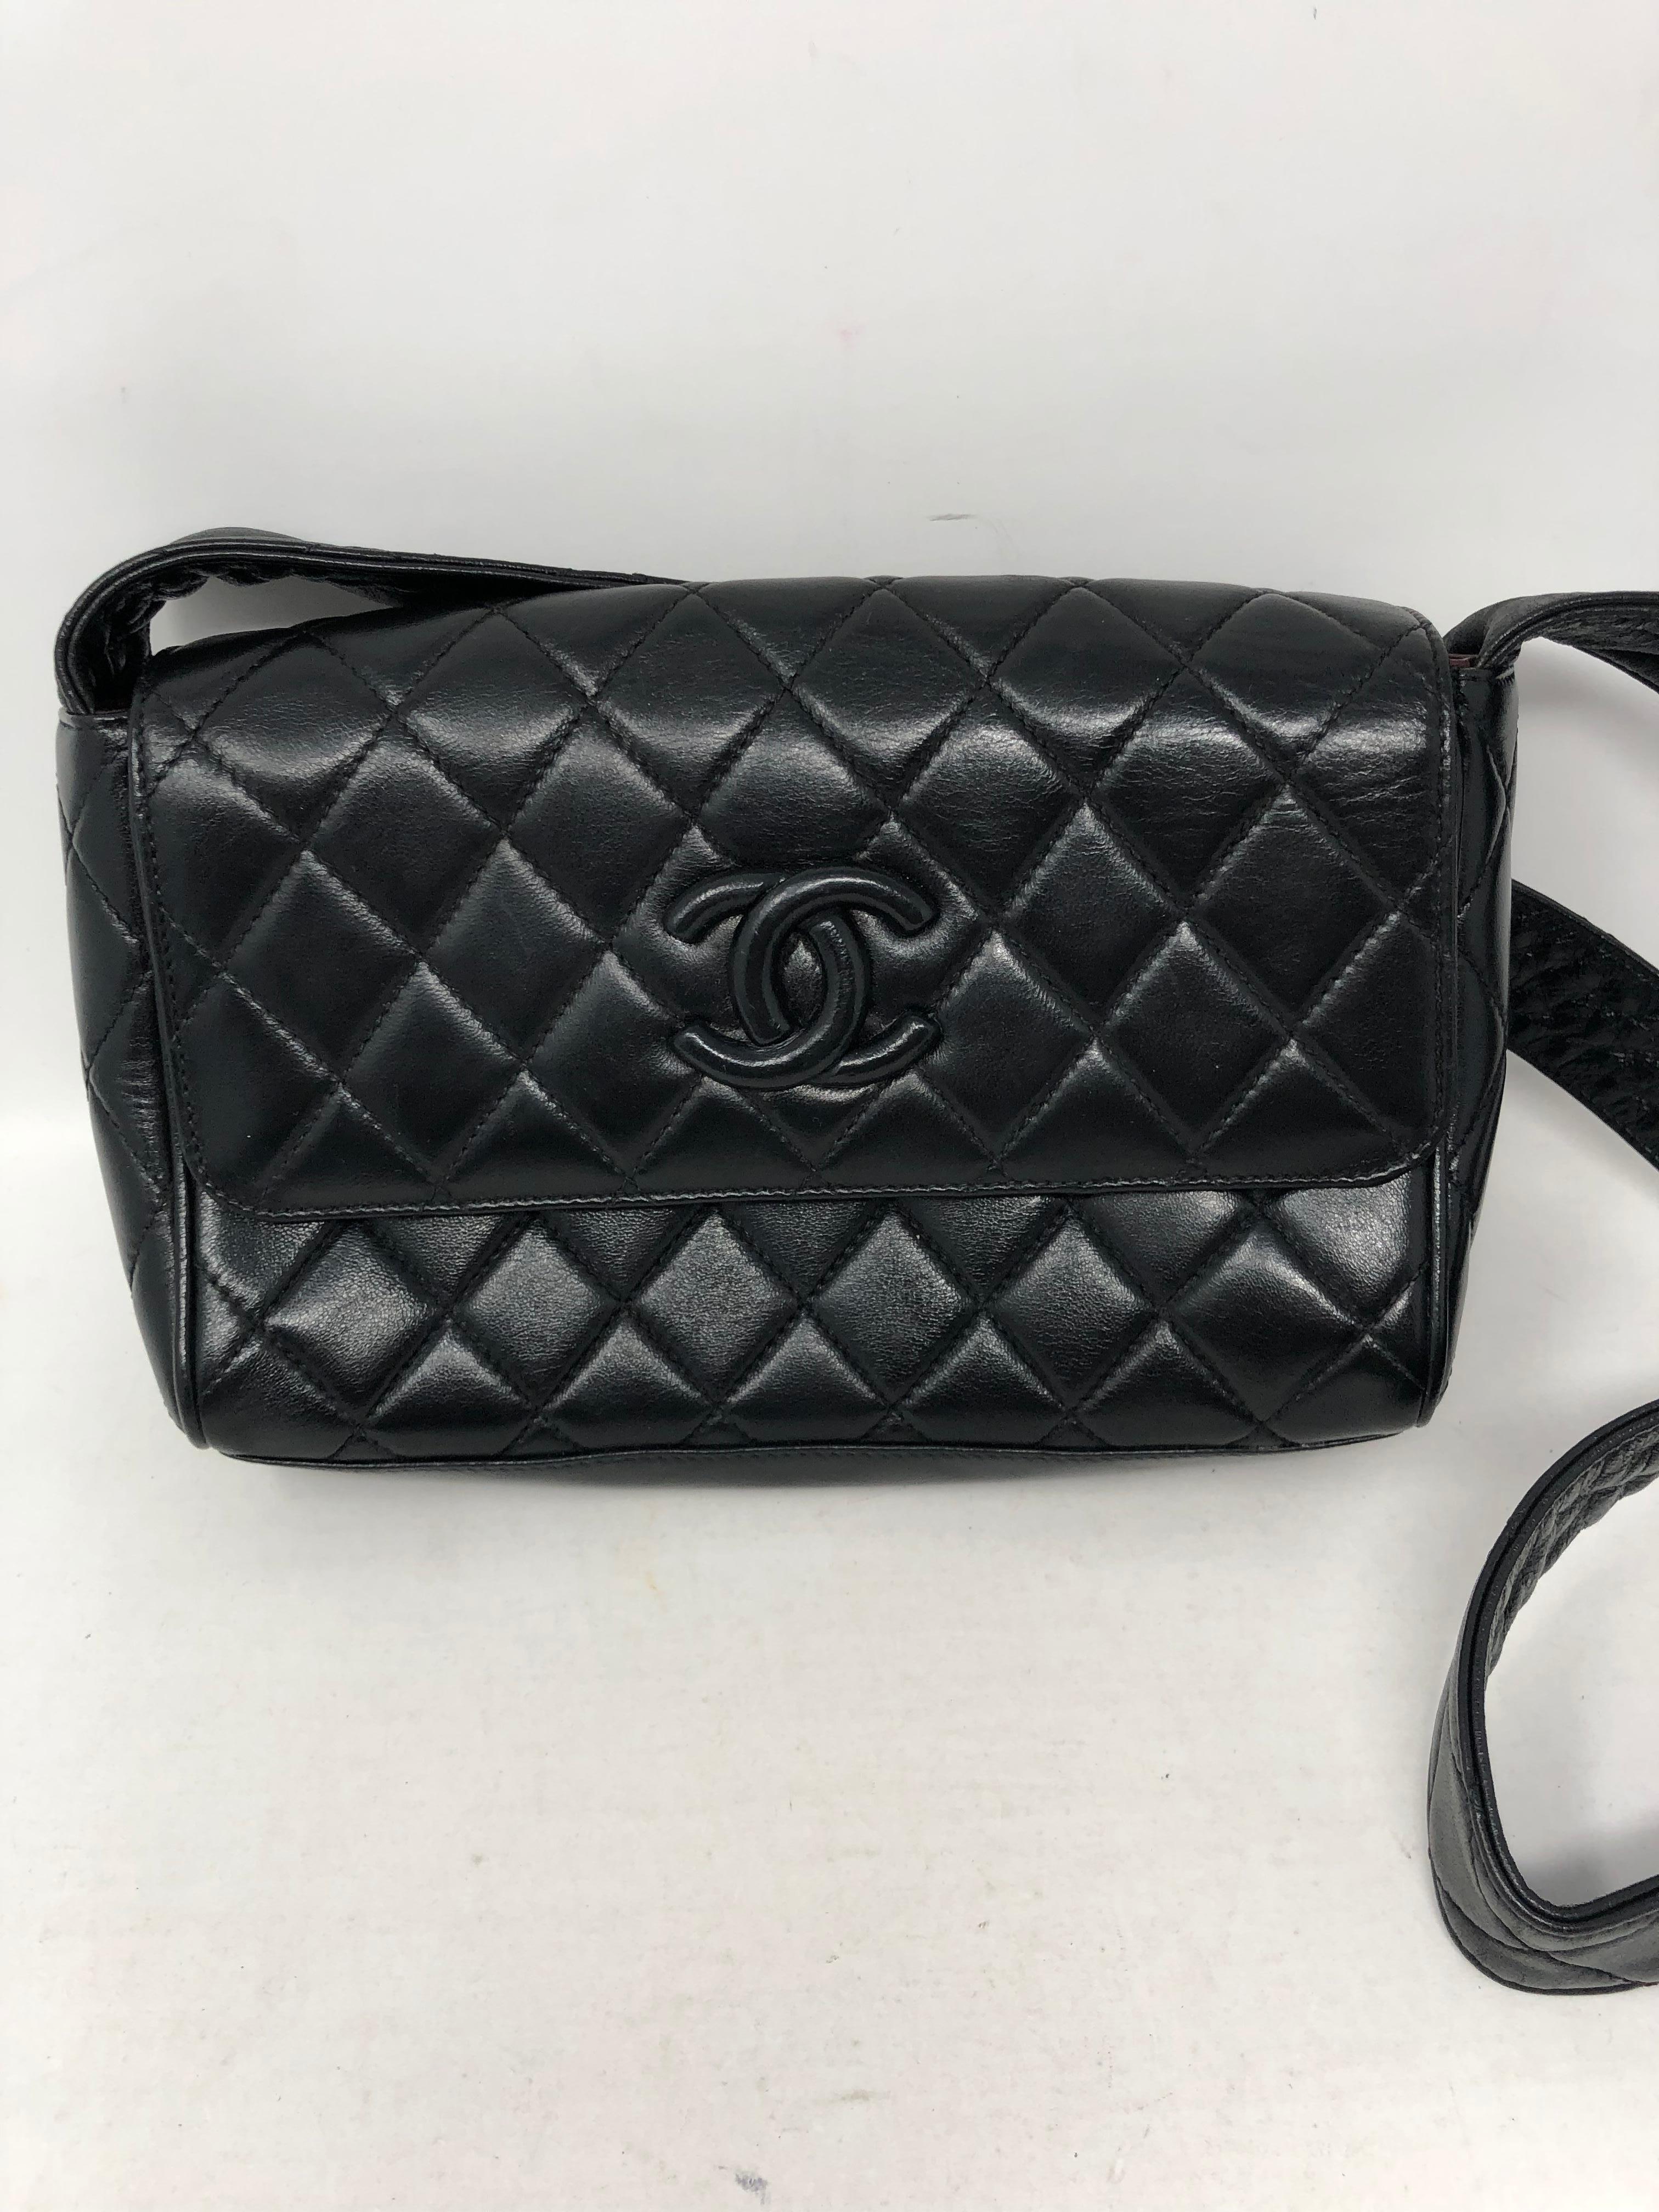 Chanel Black Leather Crossbody Bag. Matelasse leather with strap. Vintage style black on black. All leather interior. Collector's piece. Guaranteed authentic. 